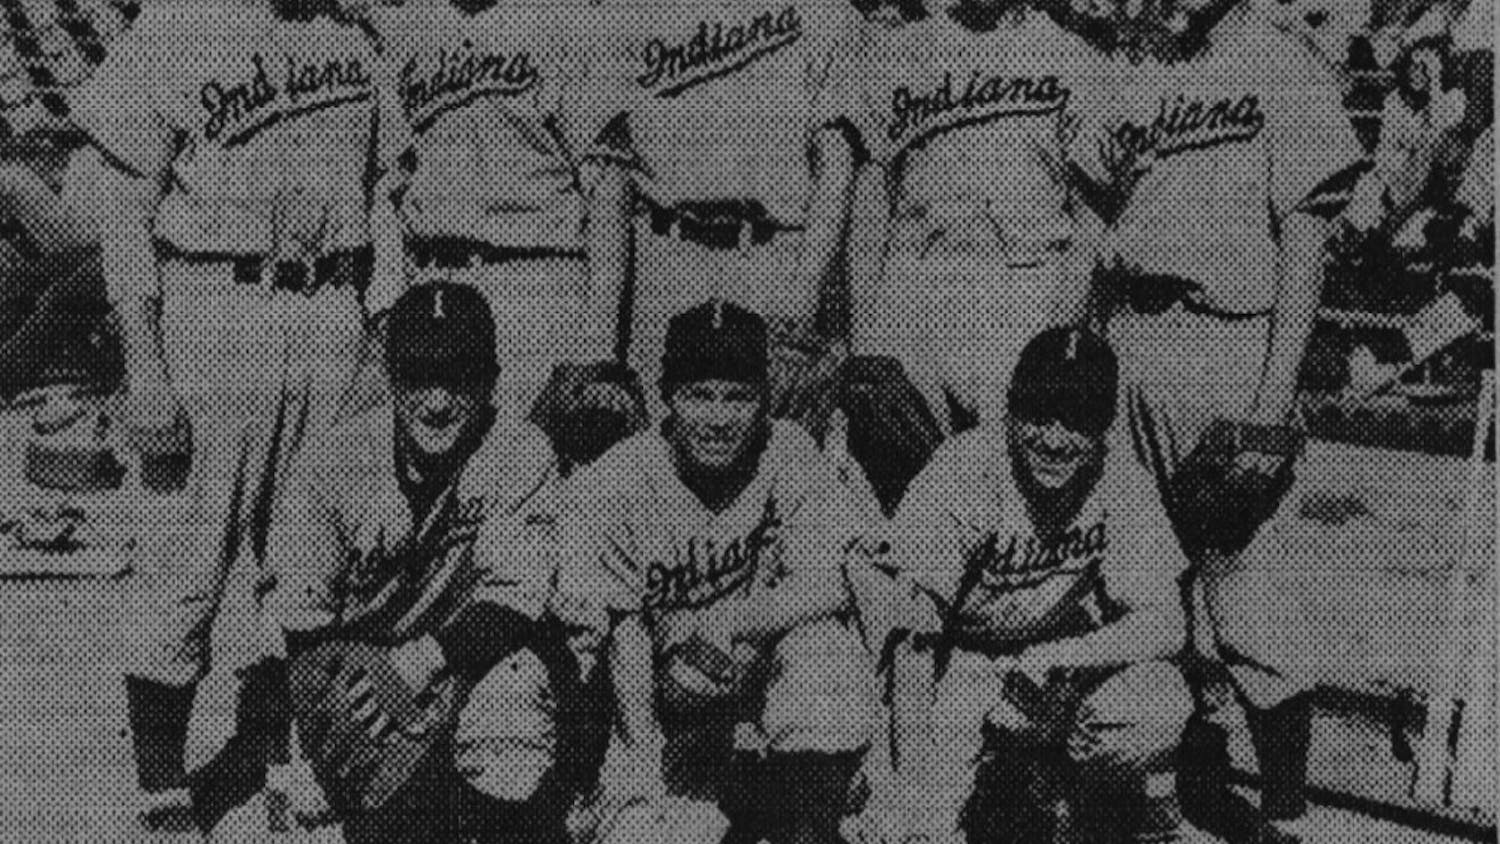 Archive image PROBABLE STARTERS -- The Iowa Hawkeyes will probably face this line-up in today's baseball game at 11:30 a.m. Kneeling, left to right, are John Kyle, third baseman; Woody Litz, second baseman and Harry Moore, centerfielder. Standing are Bill Stearman, leftfielder; Gene Ring, shortstop; John Gorkis, catcher, Don Ritter, first baseman and Bob Moore, rightfielder. Bill Tosheff, not pictured, will be on the mound for the Hoosiers.